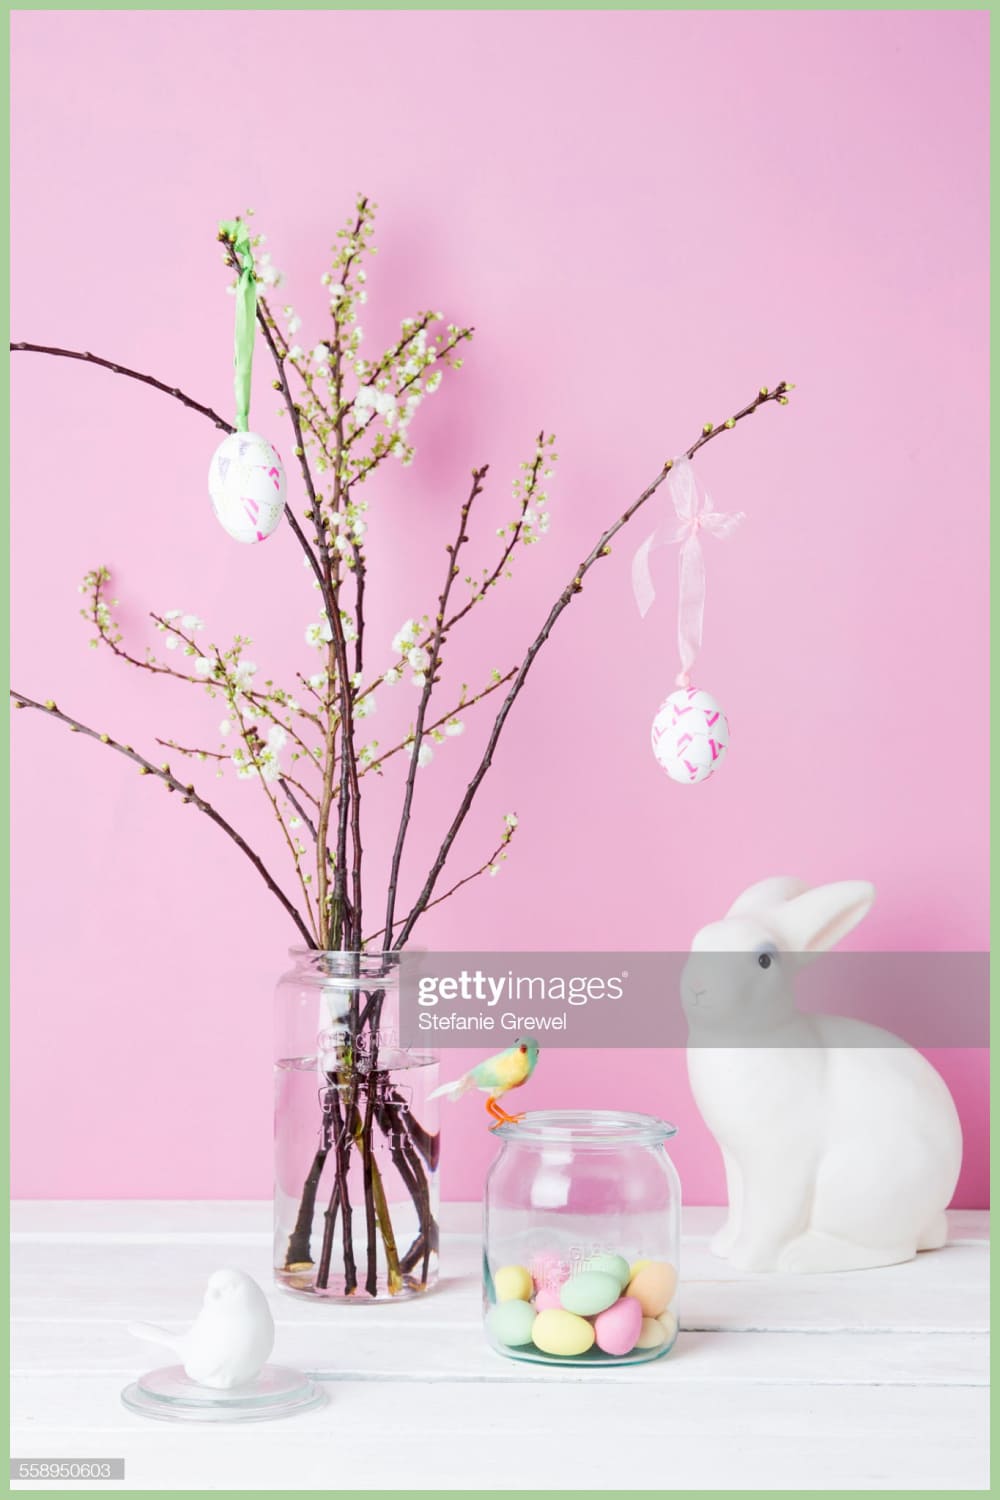 Vase filled with flowers next to an easter decoration.